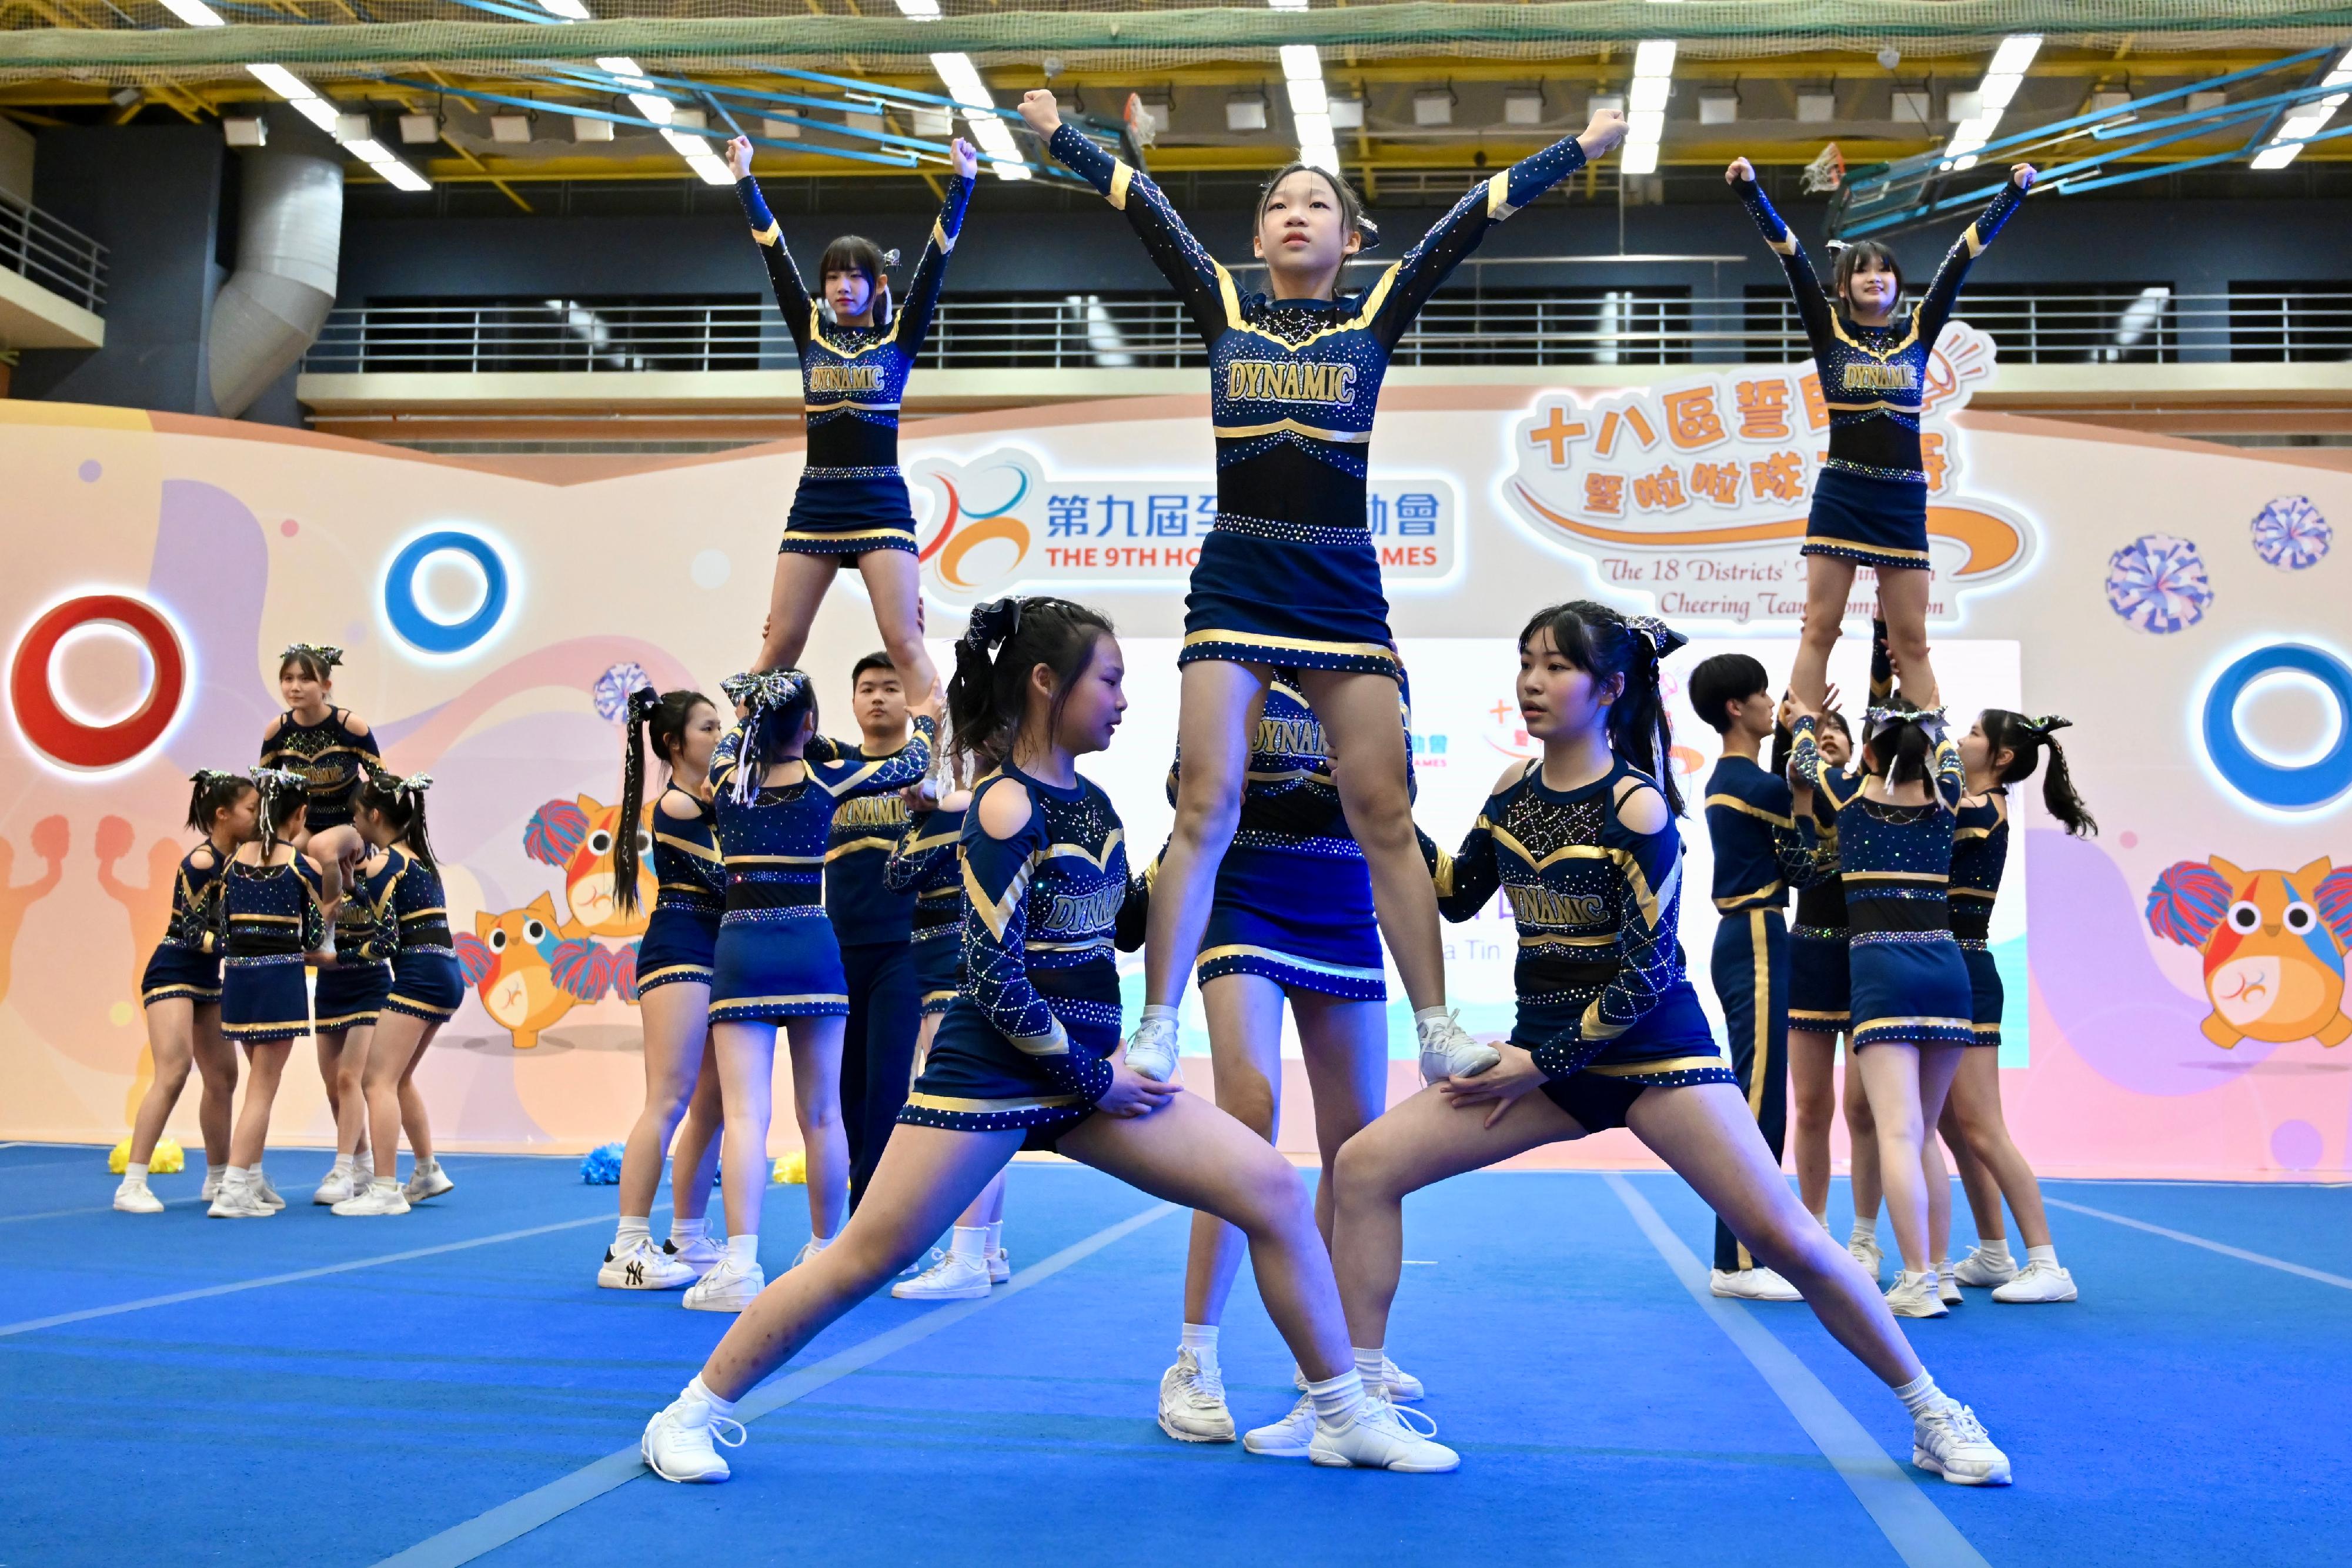 The cheering teams vie for the Best Performance Award, the Best Local Characteristics Award and the Highest Popularity Award at the 18 Districts' Cheering Team Competition of the 9th Hong Kong Games held today (February 25).